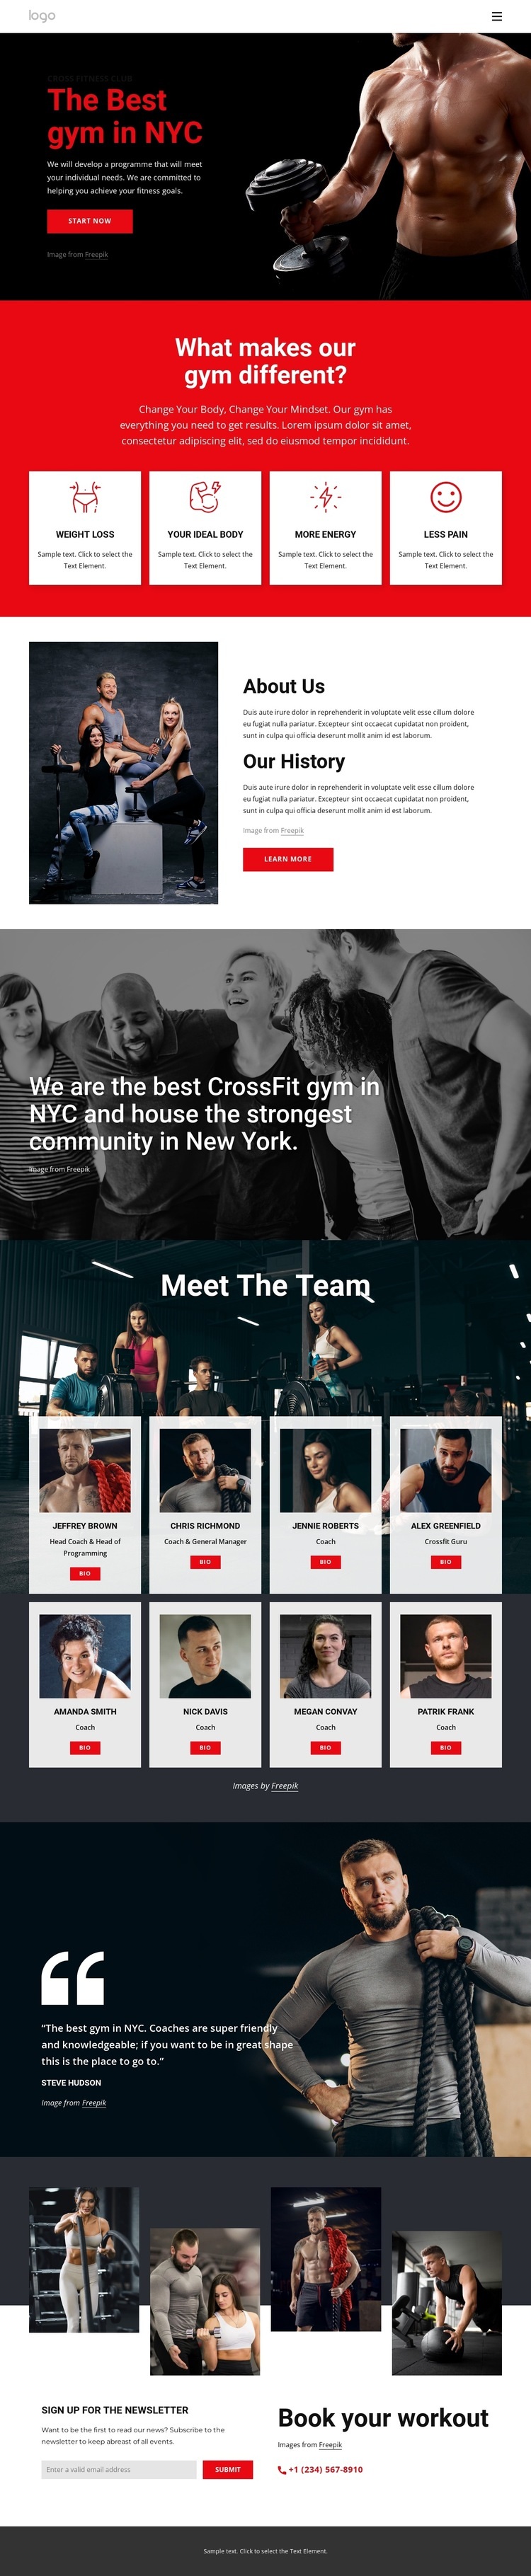 The best crossfit gym Web Page Design